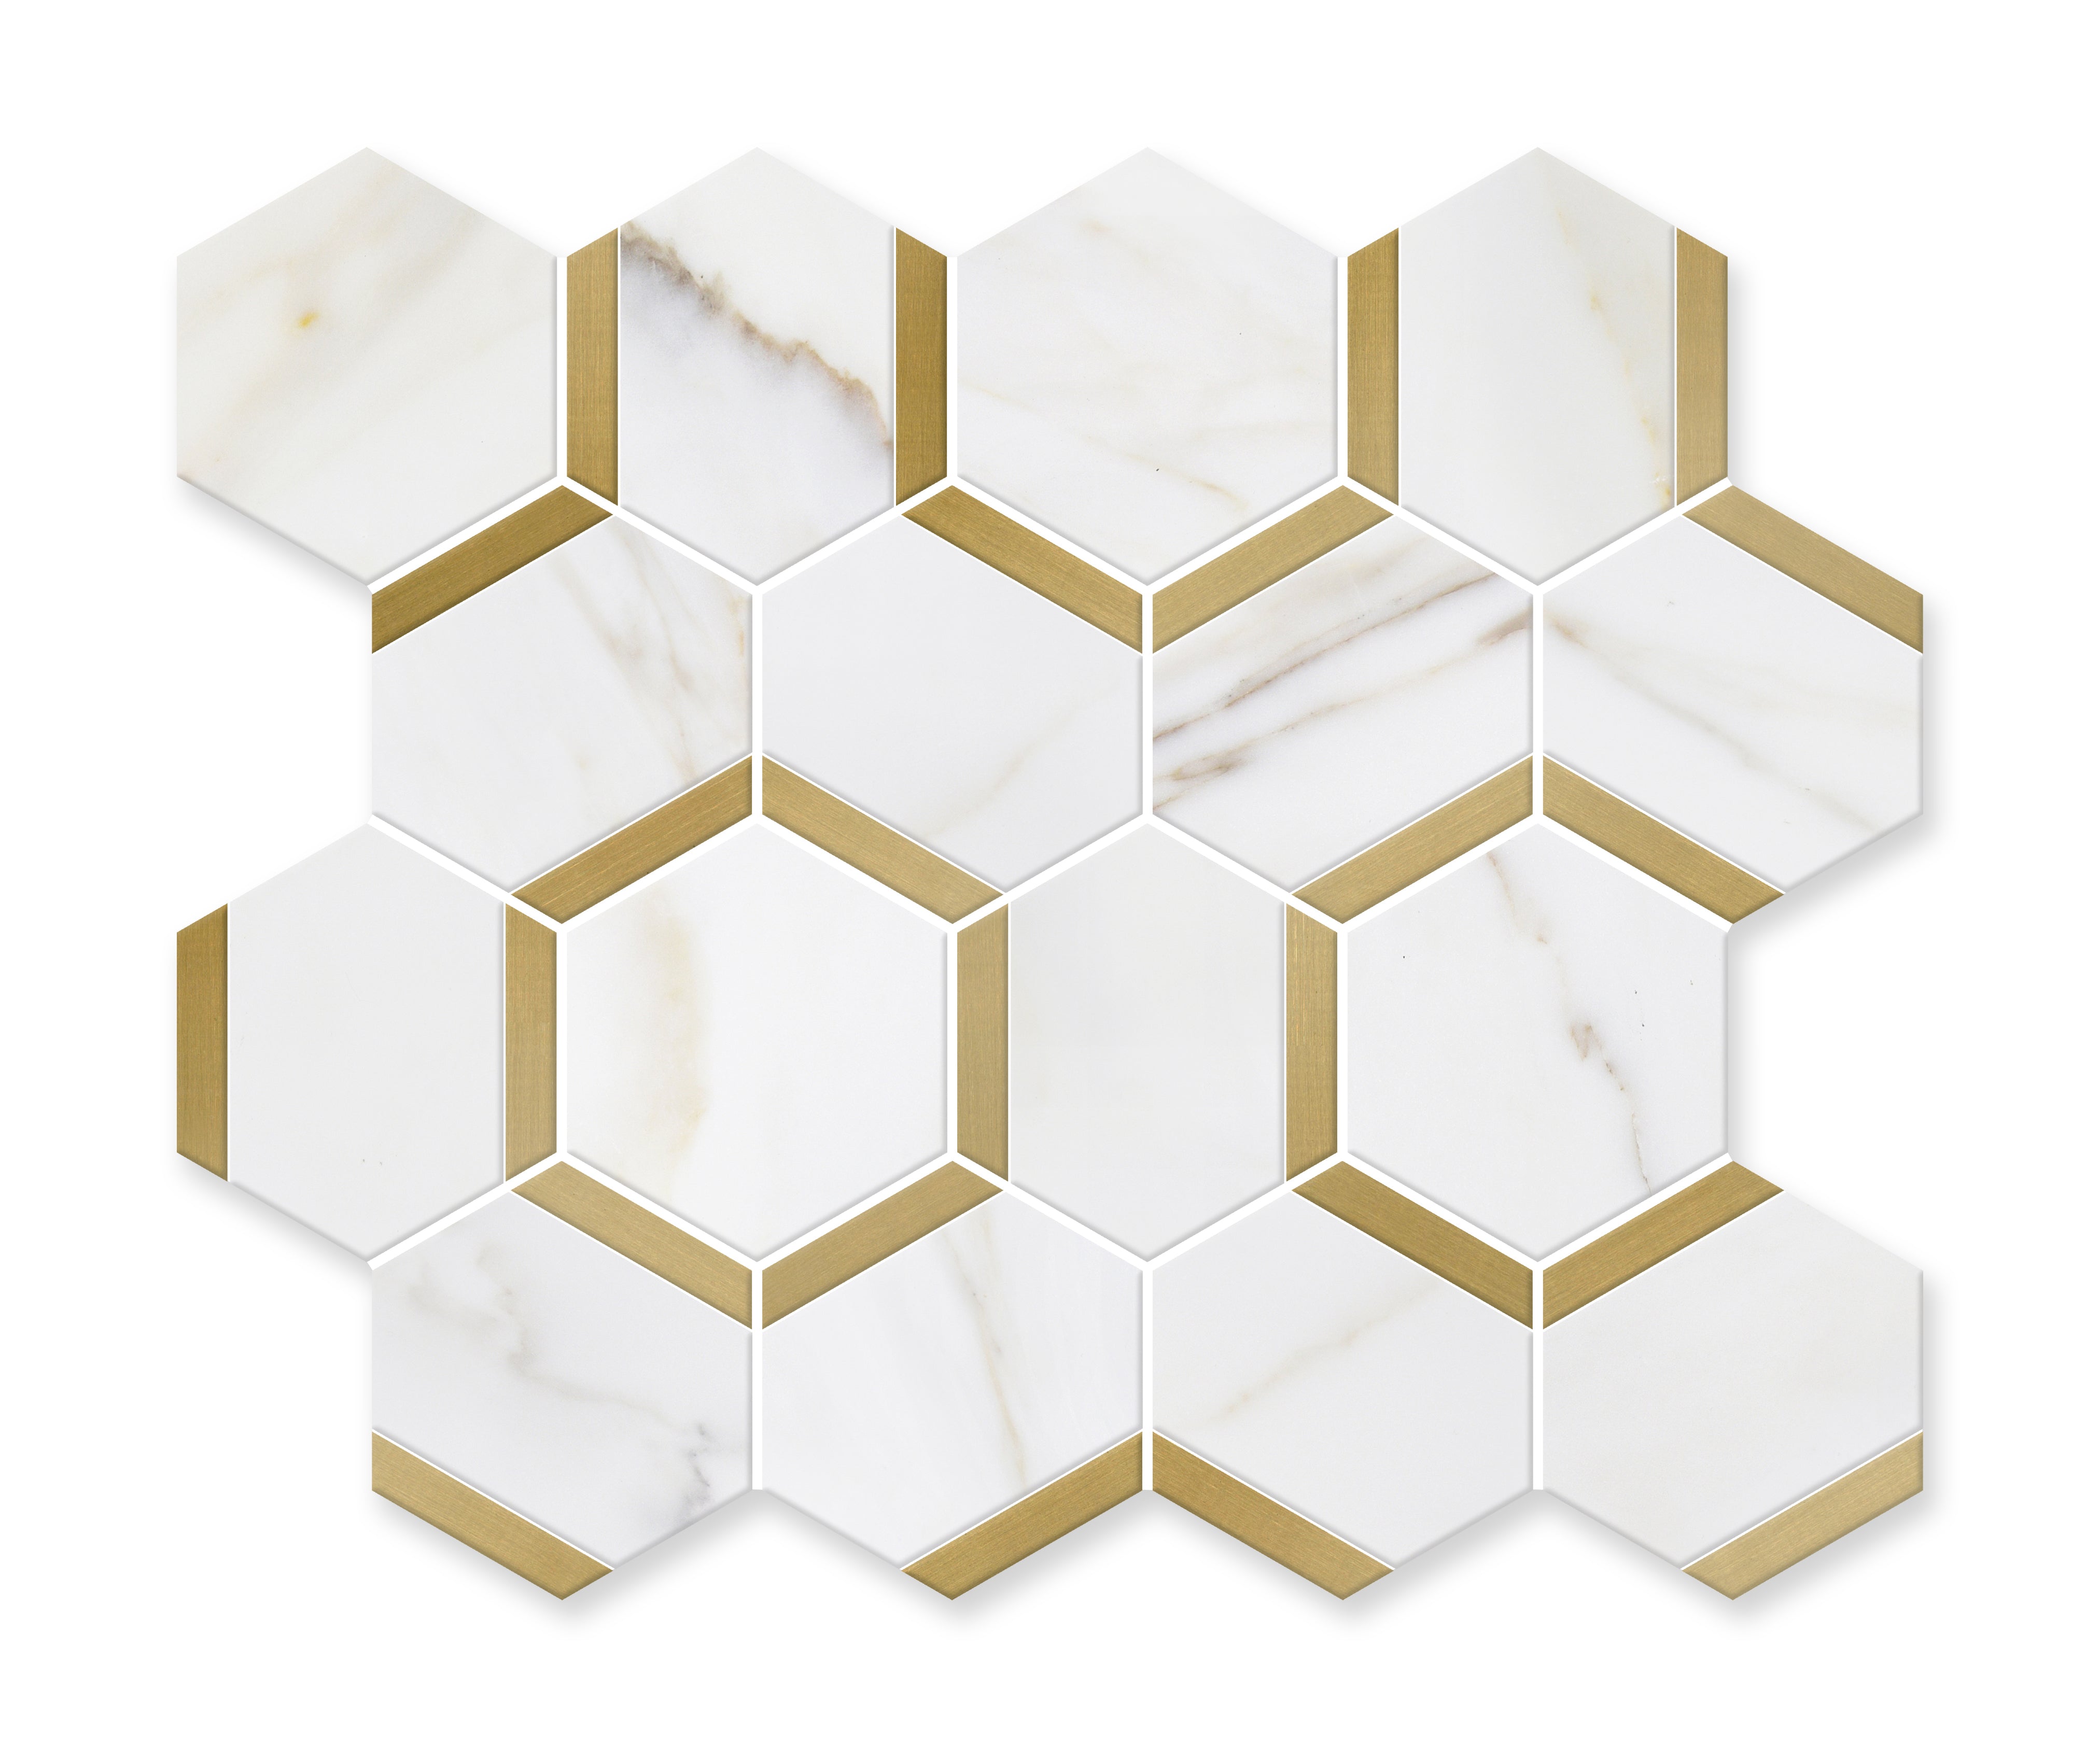 dulcet magnolia gold ftm5 natural stone mosaic product sheet made by dulcet and sold by surface group international